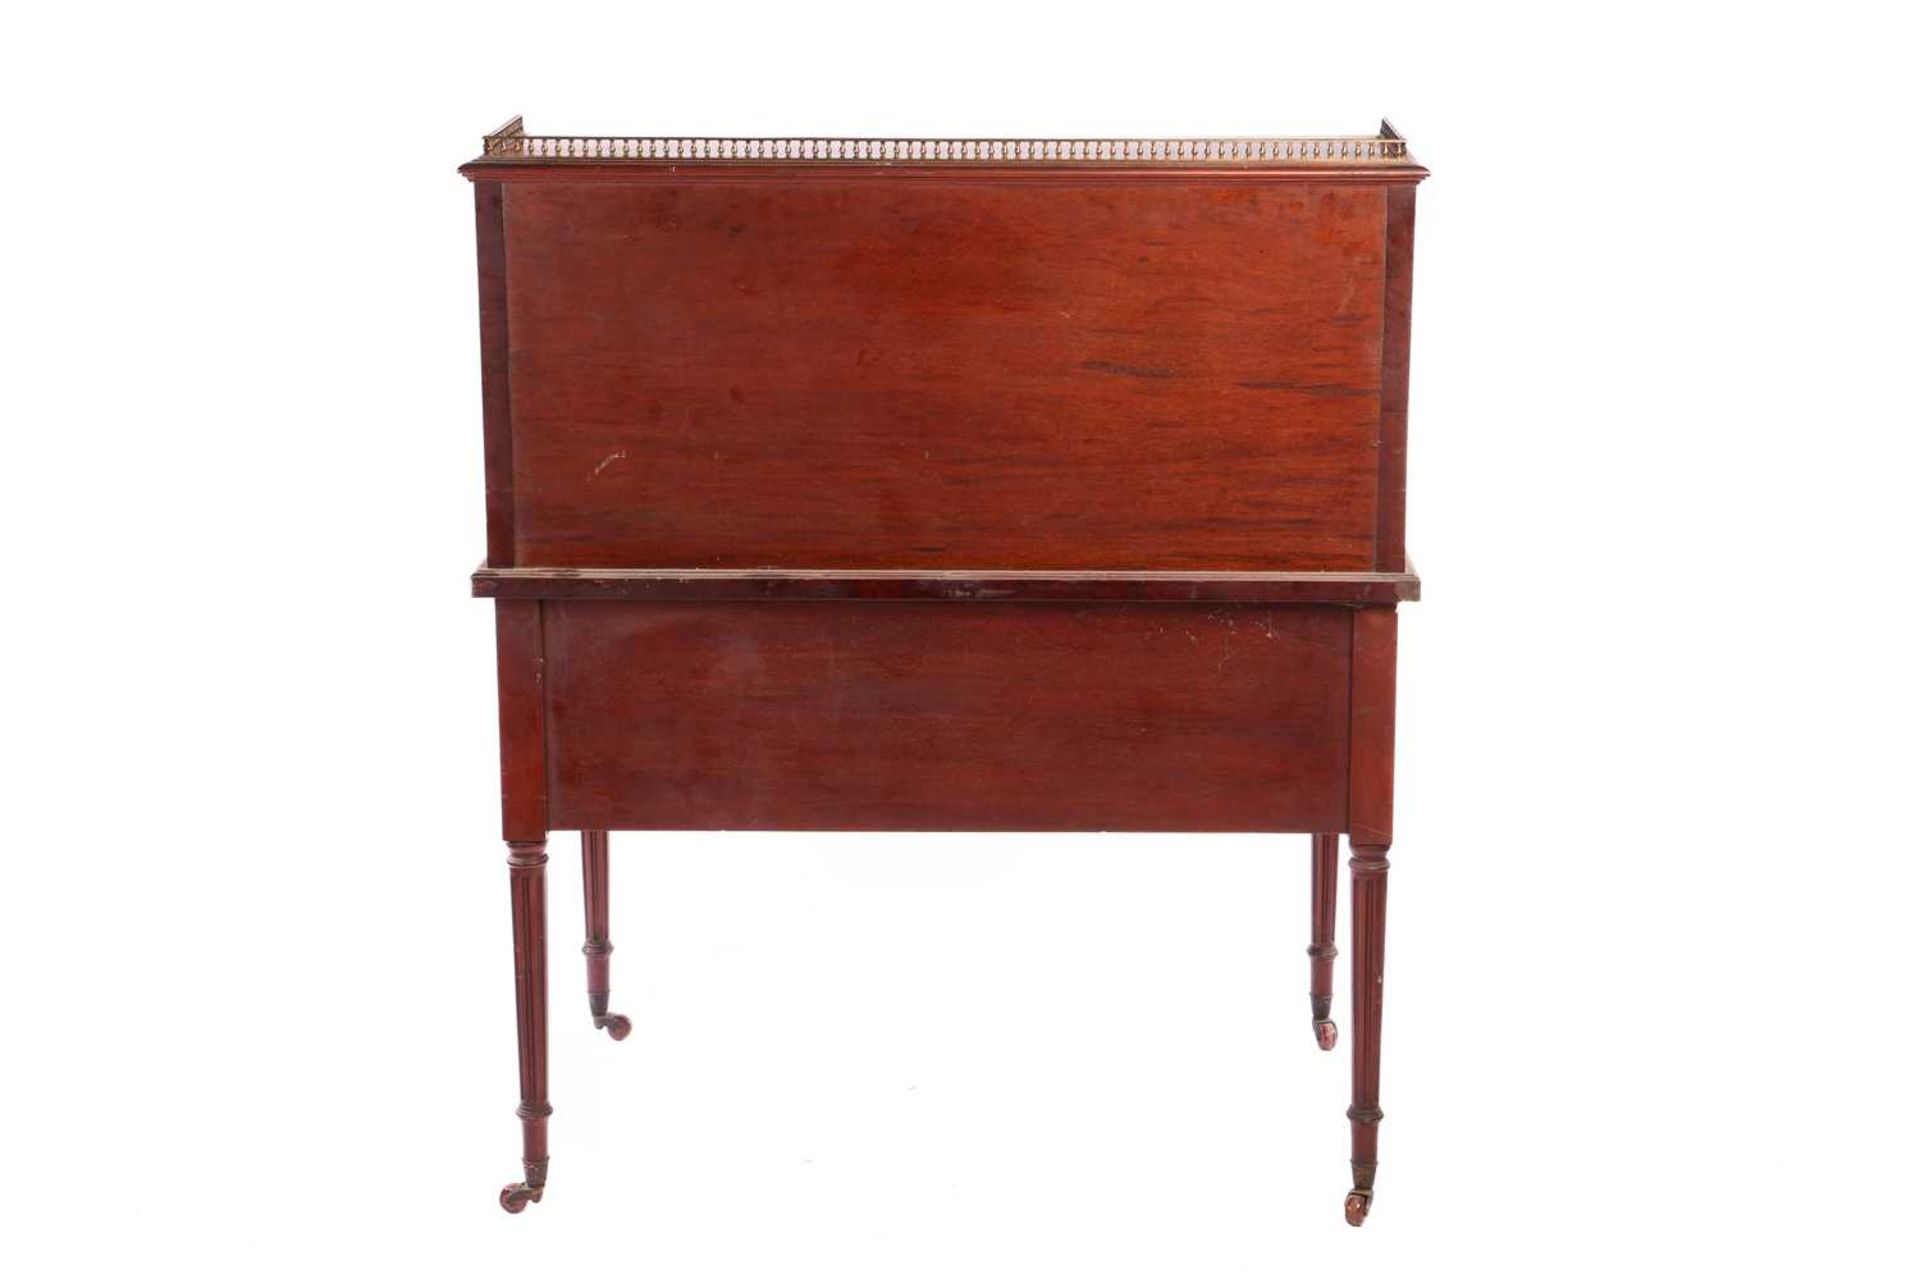 A Hobbs &amp; Co, Edwardian 'plum pudding' mahogany and marquetry cylinder writing bureau with a thr - Image 7 of 7